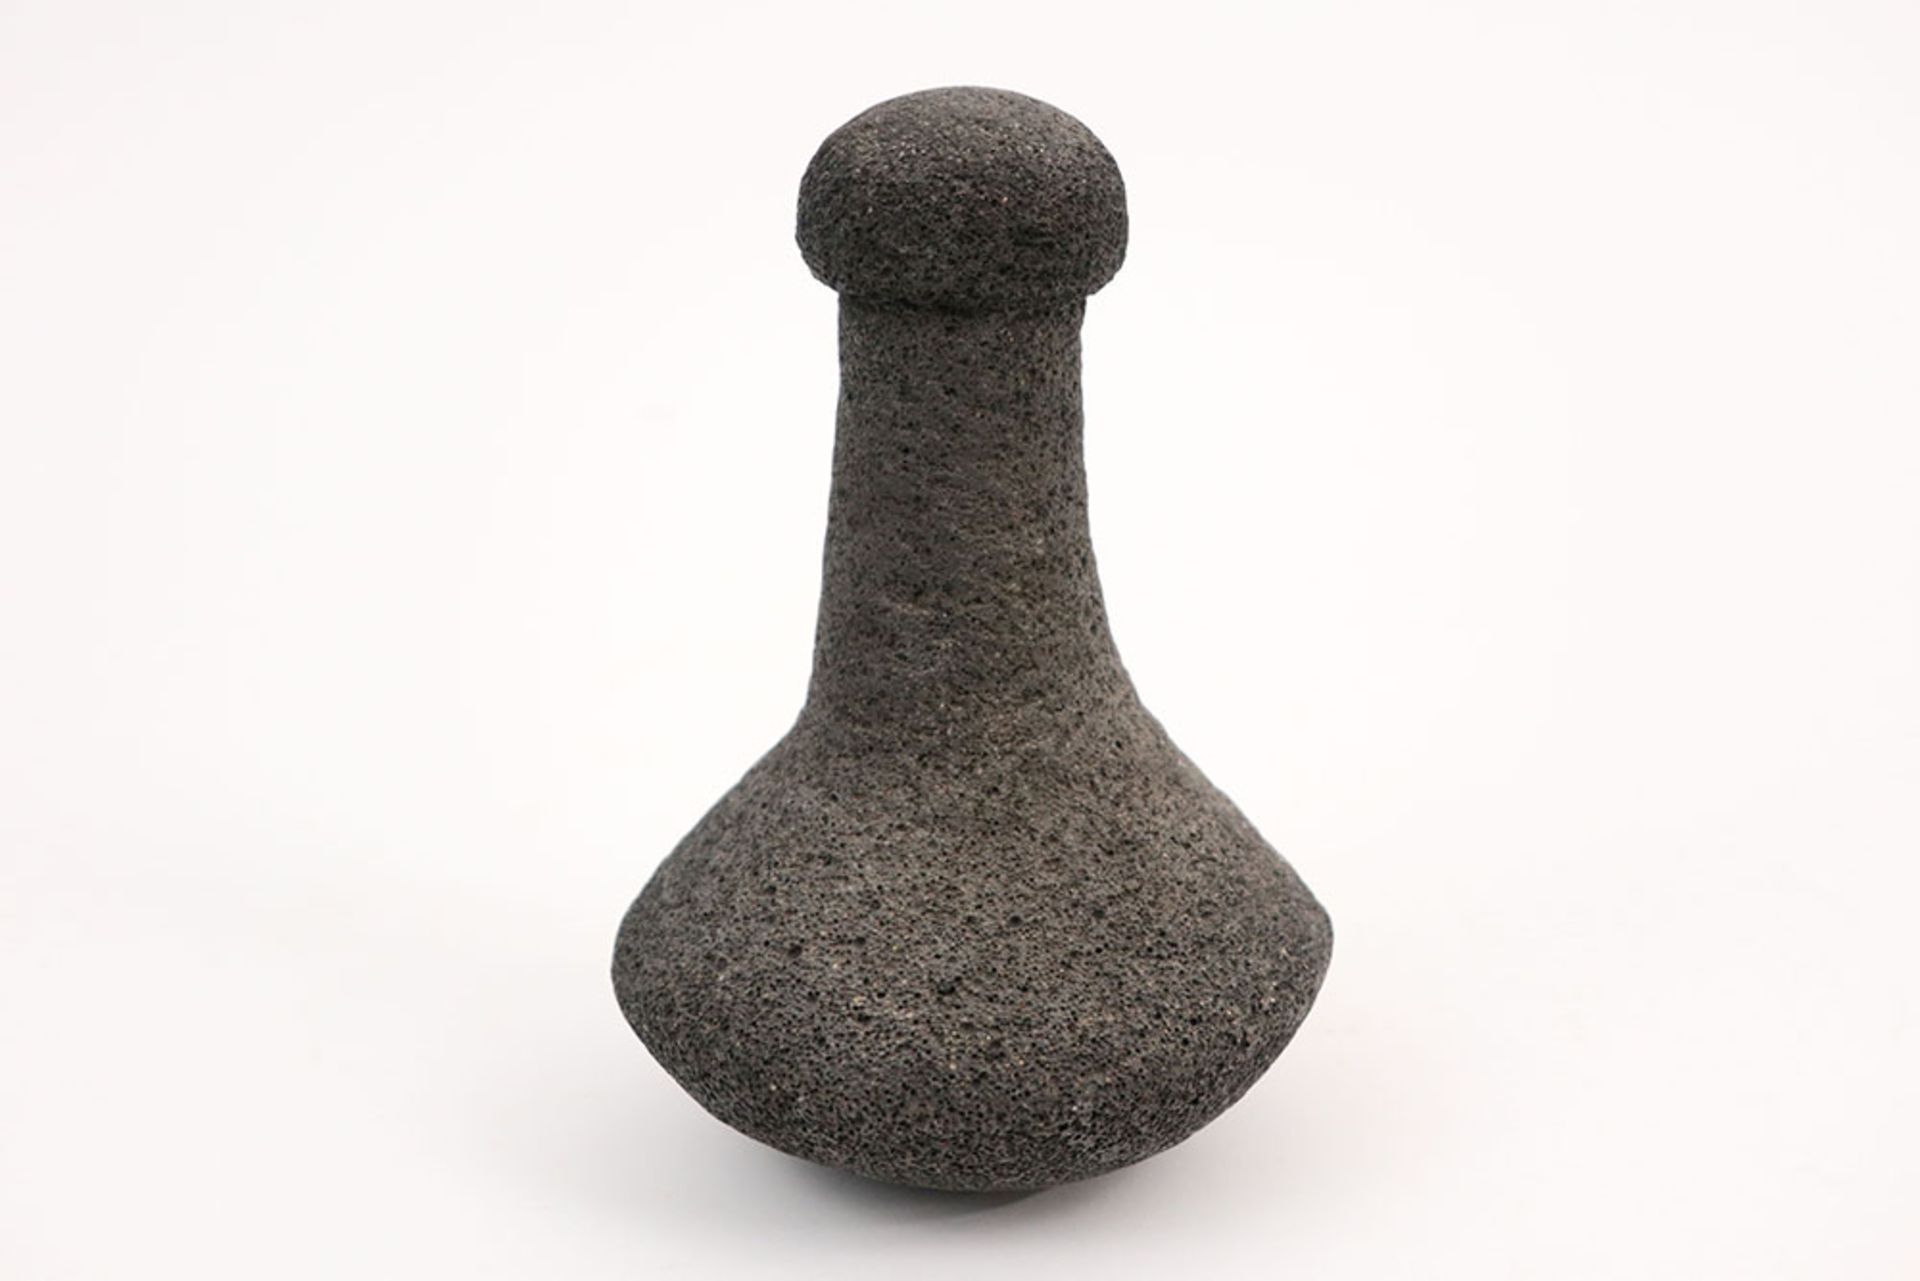 19th Cent. Polynesian "Poi" food pounder in grey basalt prov : bought at the Michel Thieme galery in